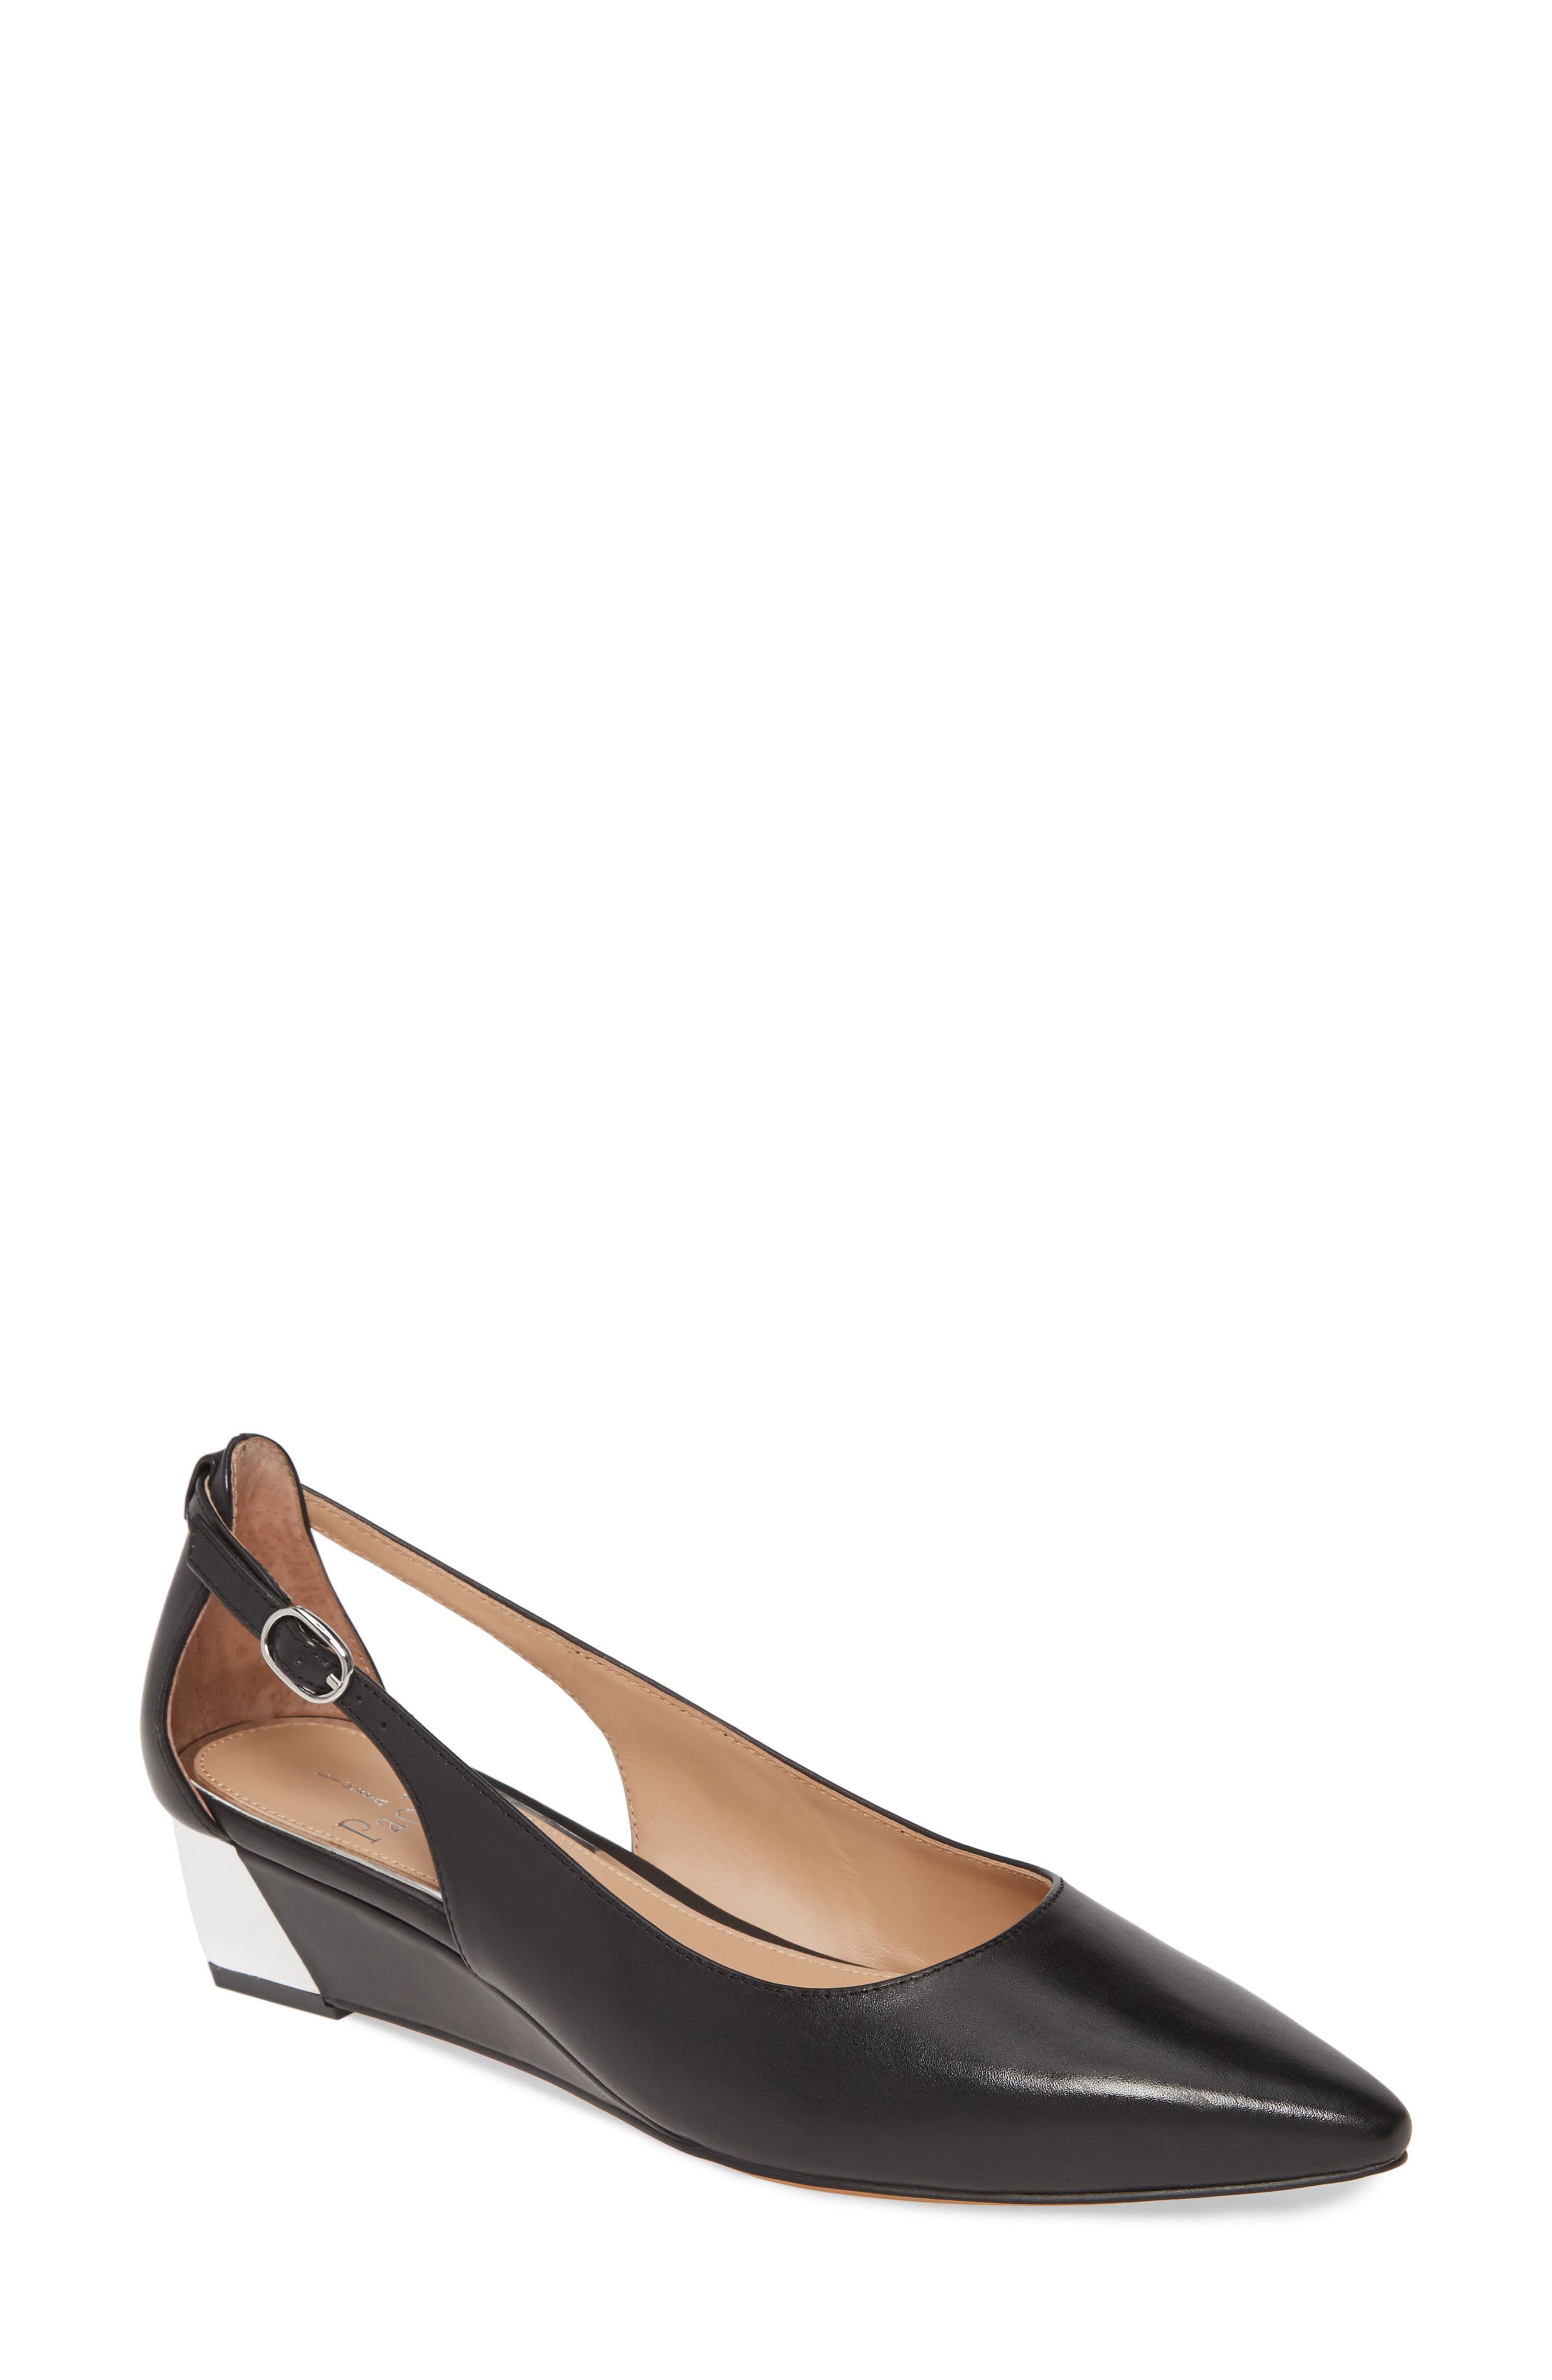 nordstrom paolo wedge